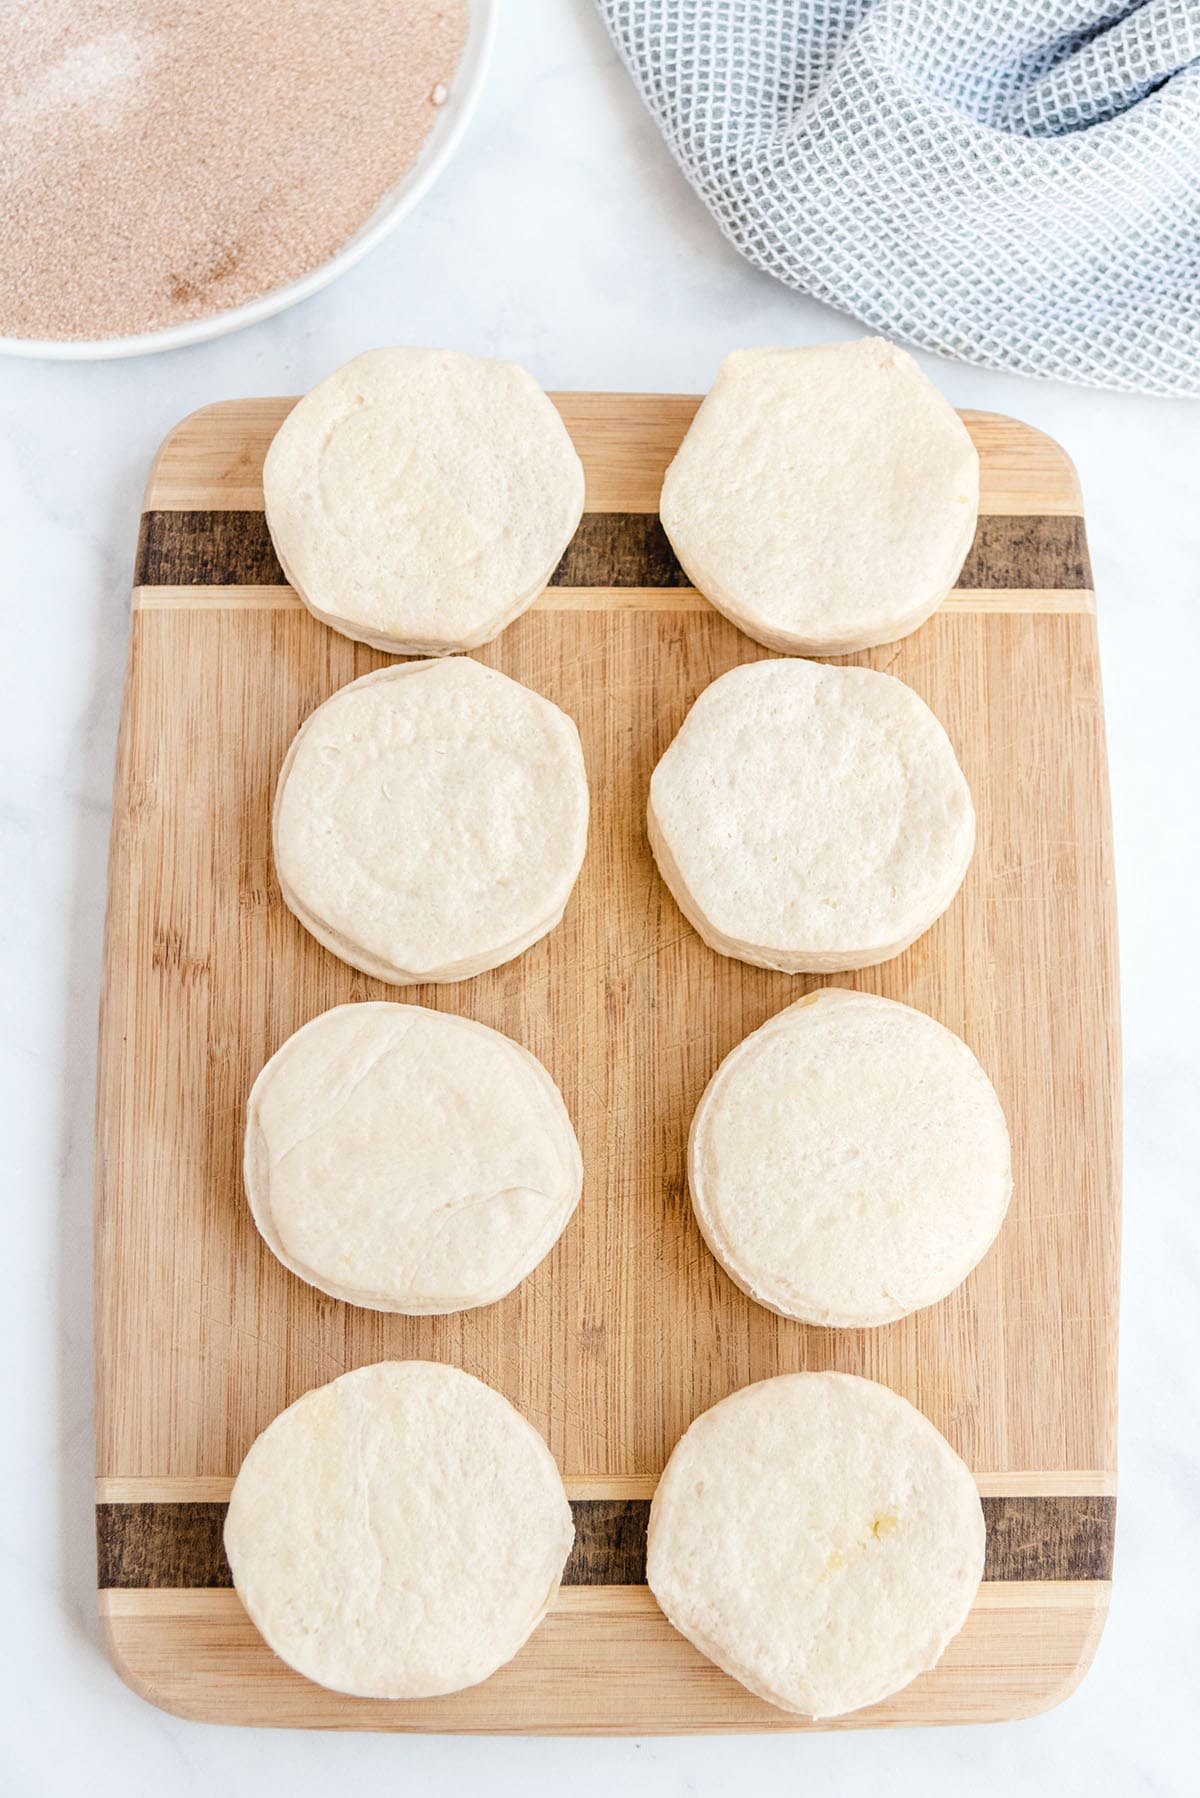 lay your biscuits on a flat cutting surface